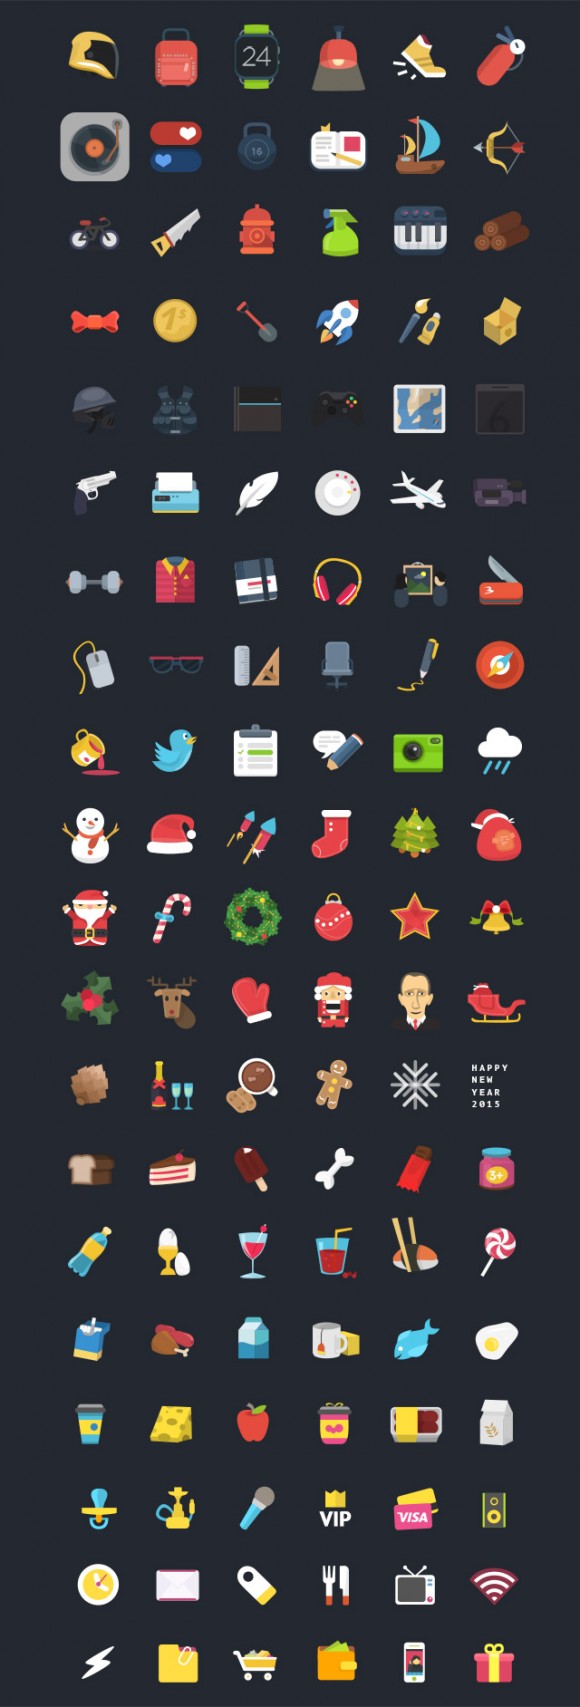 120+ Free PSD colourful icons - Full image